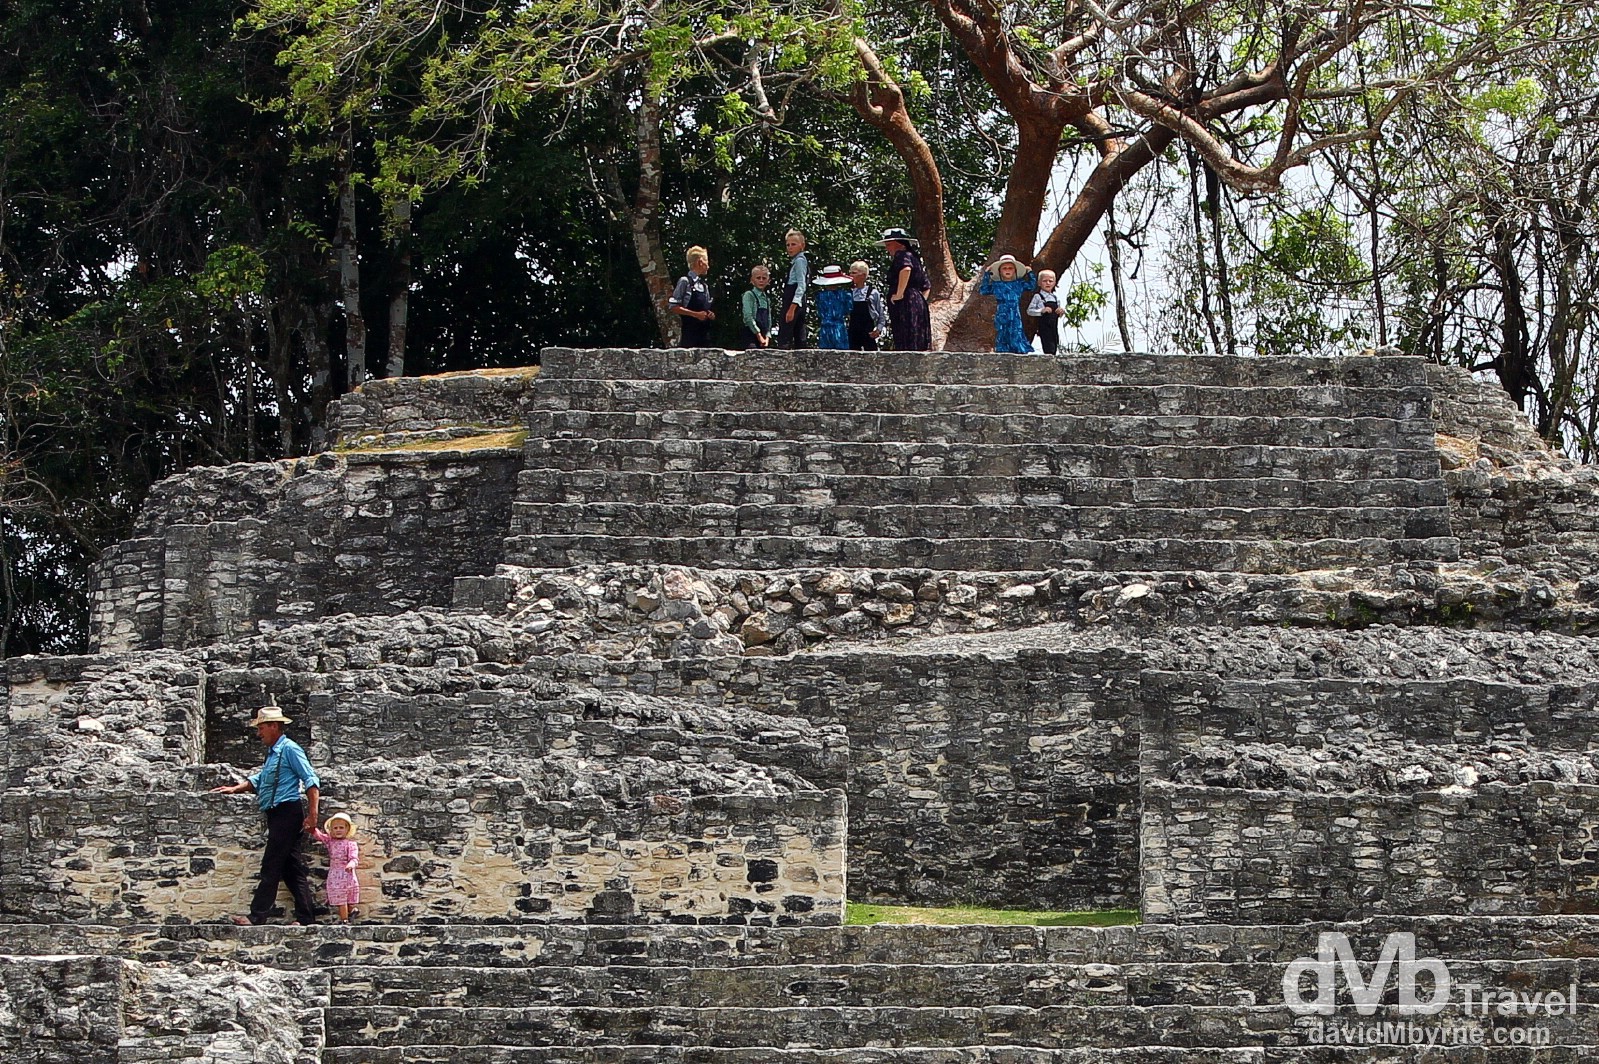 A Mennonite family on the Jaguar Temple at the Lamanai Mayan ruins in Central Belize. May 11th 2013.